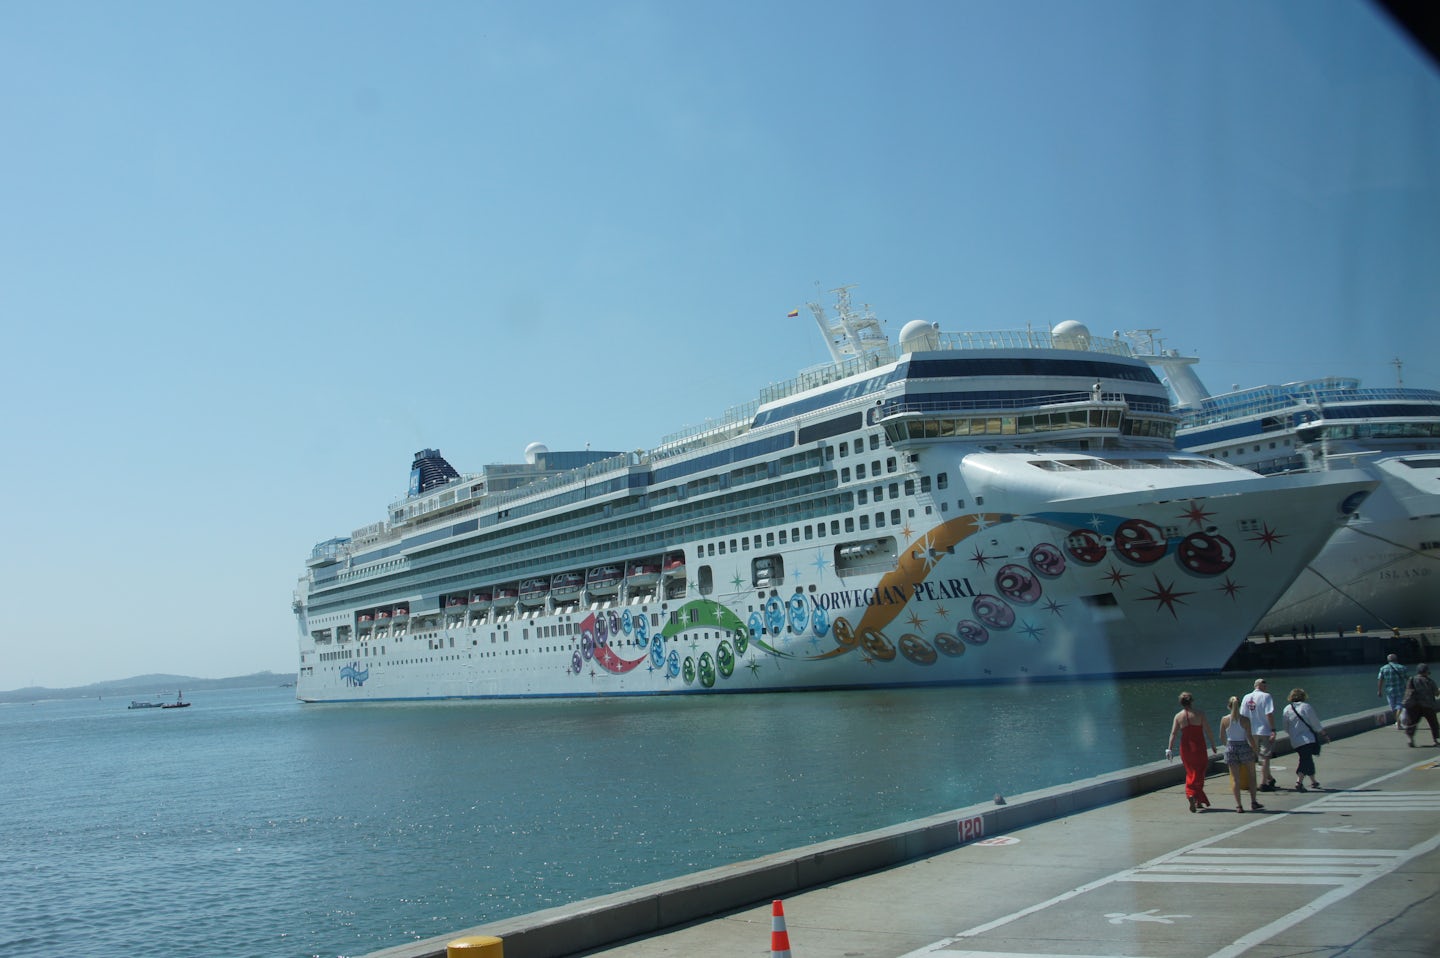 The beautiful Norwegian Pearl at the Port on Cartagena, Colombia